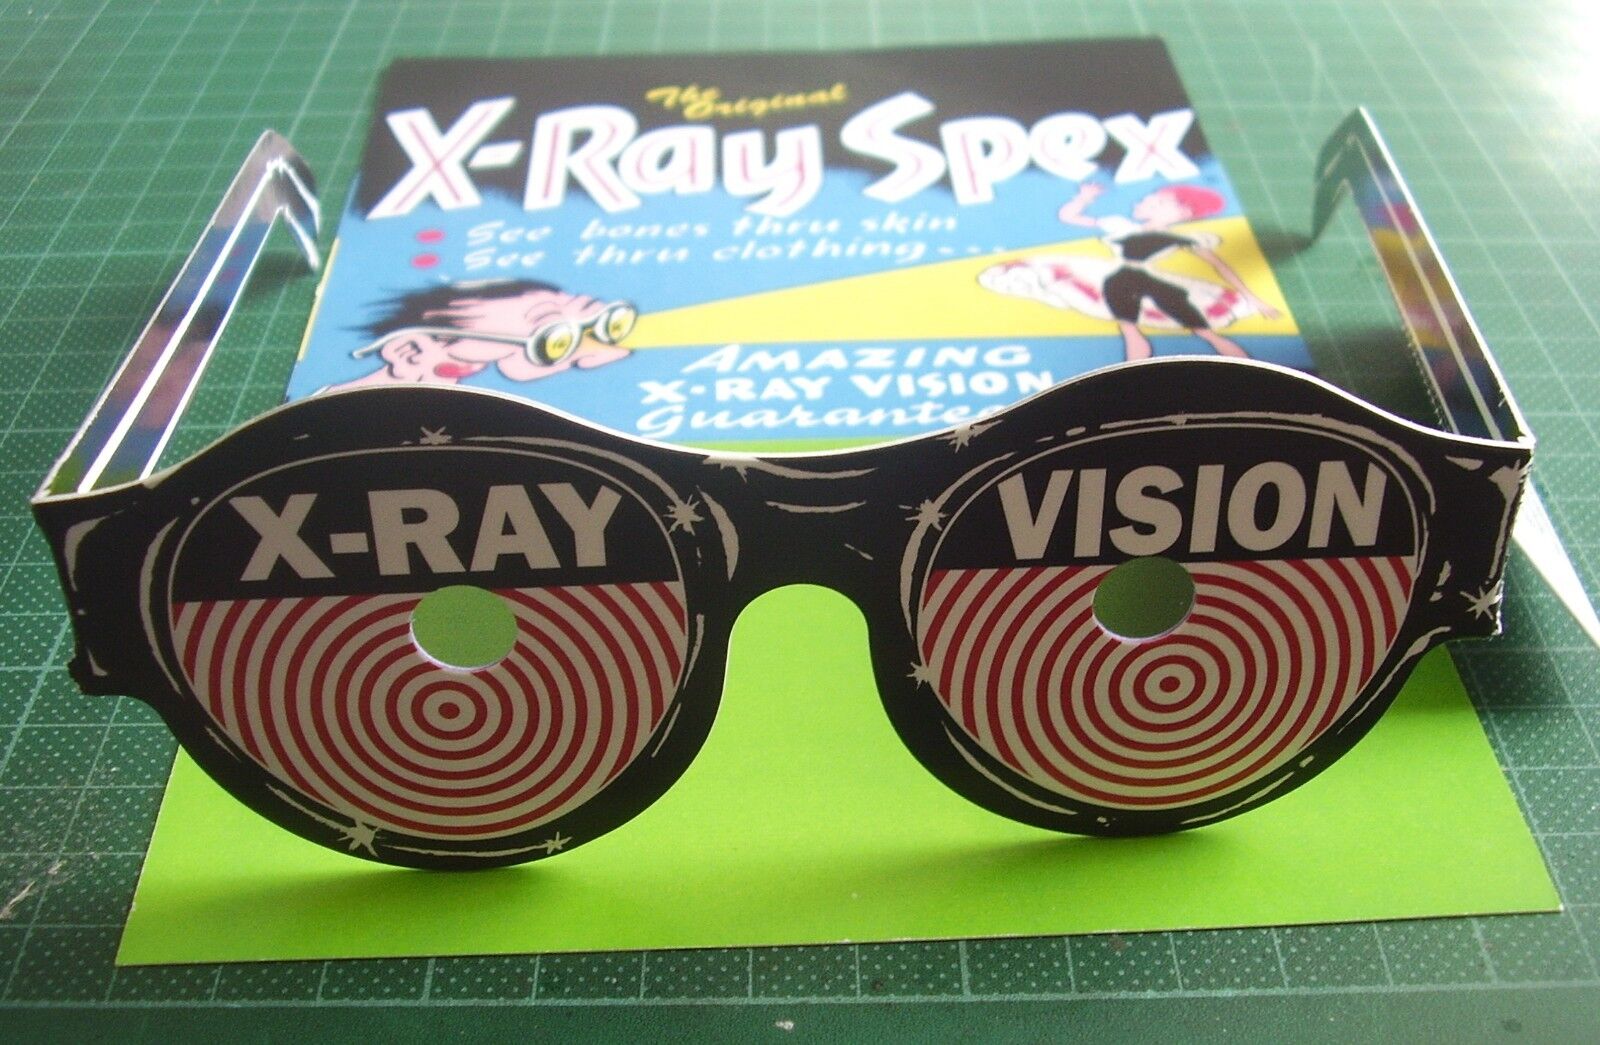 Lentes De Rayos Popular shop is the lowest Sale price price challenge Equis juguete toy Spex ray X